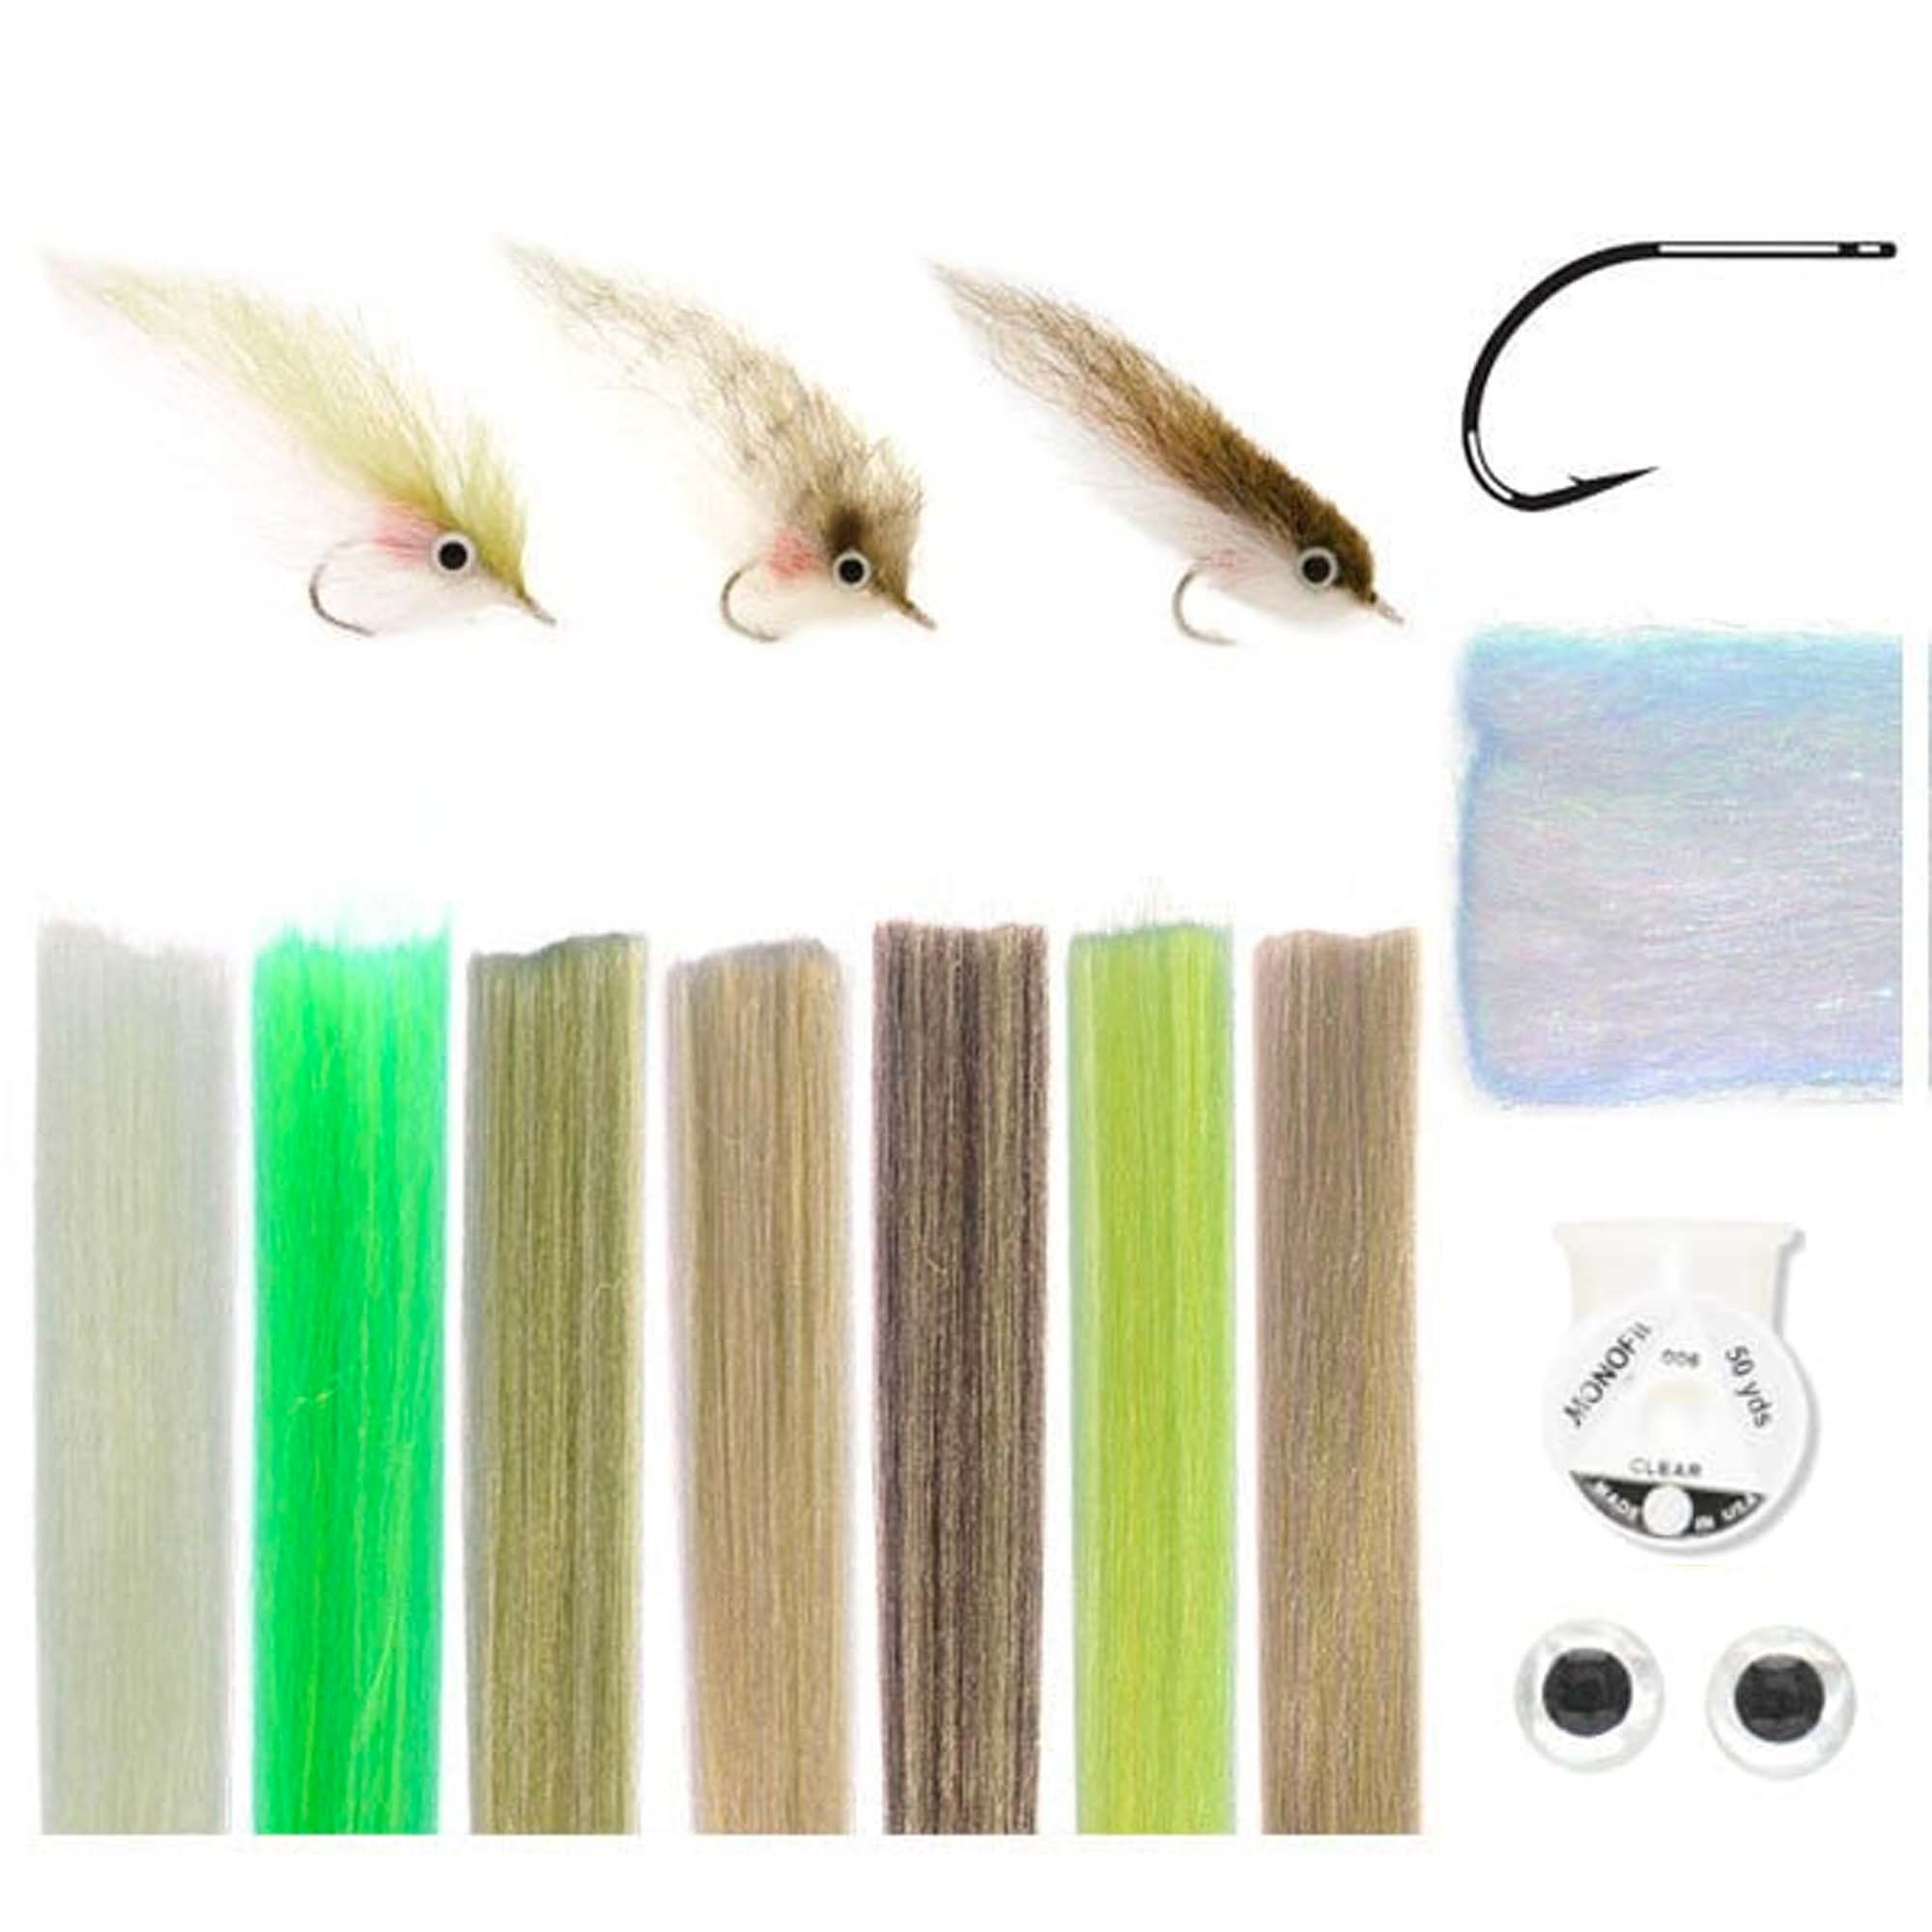 Fly Fisherman Warmwater Fly Tying 2-Disc Set